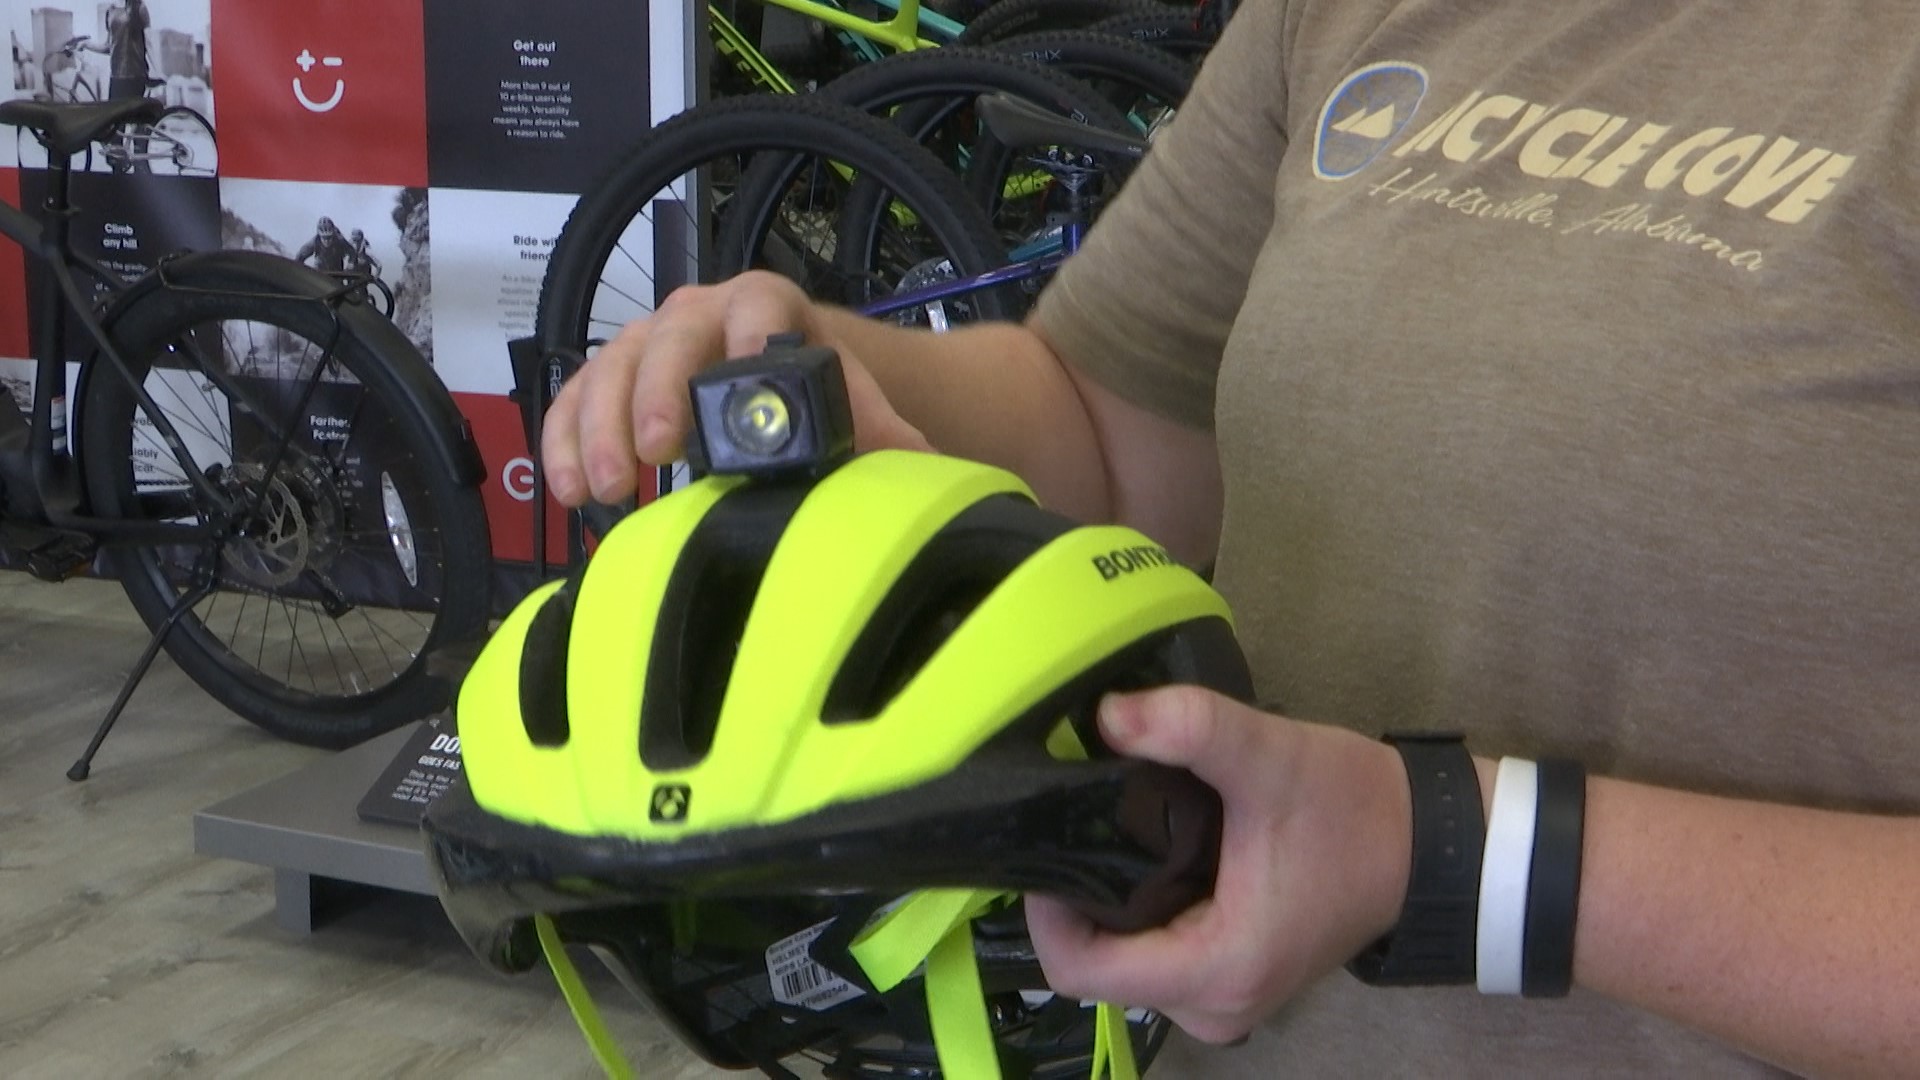 Cyclist talks about cycling safety gear.